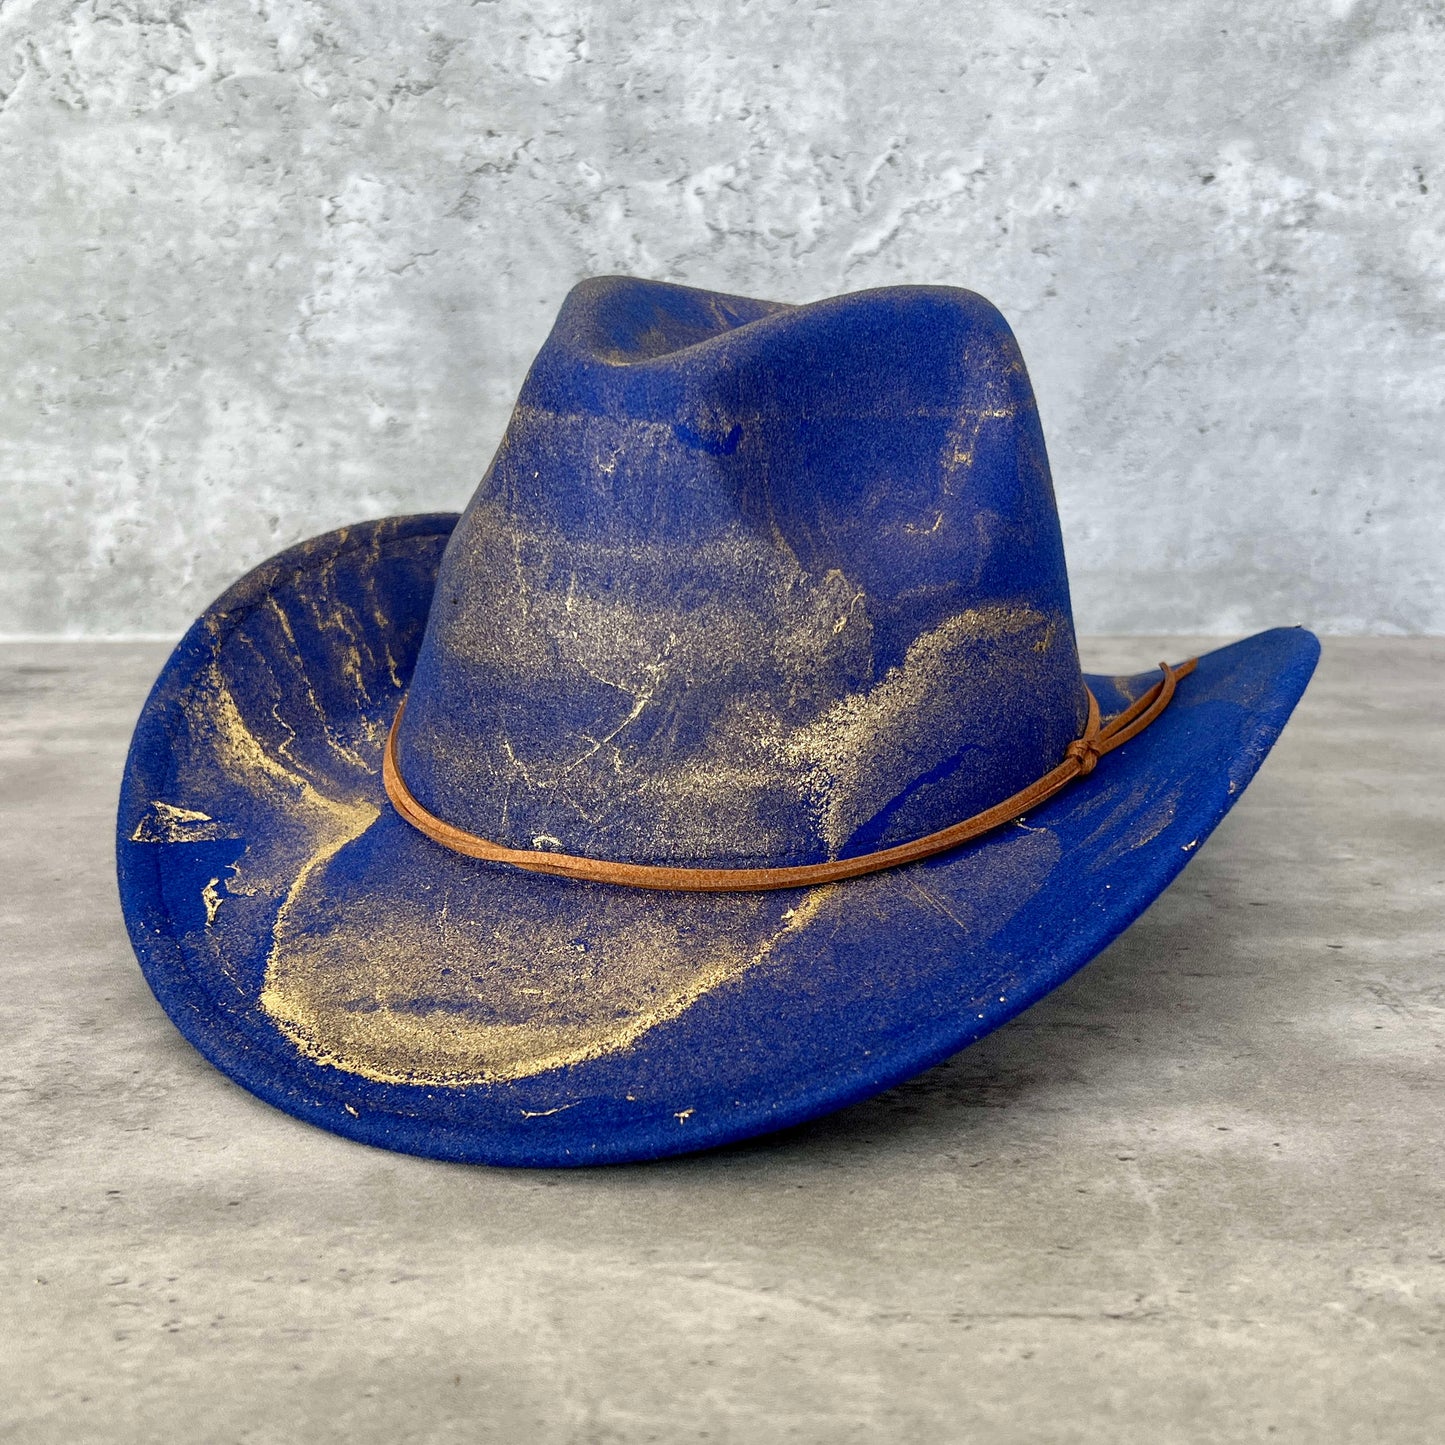 Royal cobalt blue western cowboy hat painted with gold marbling. Has light brown faux suede cord hat band. 